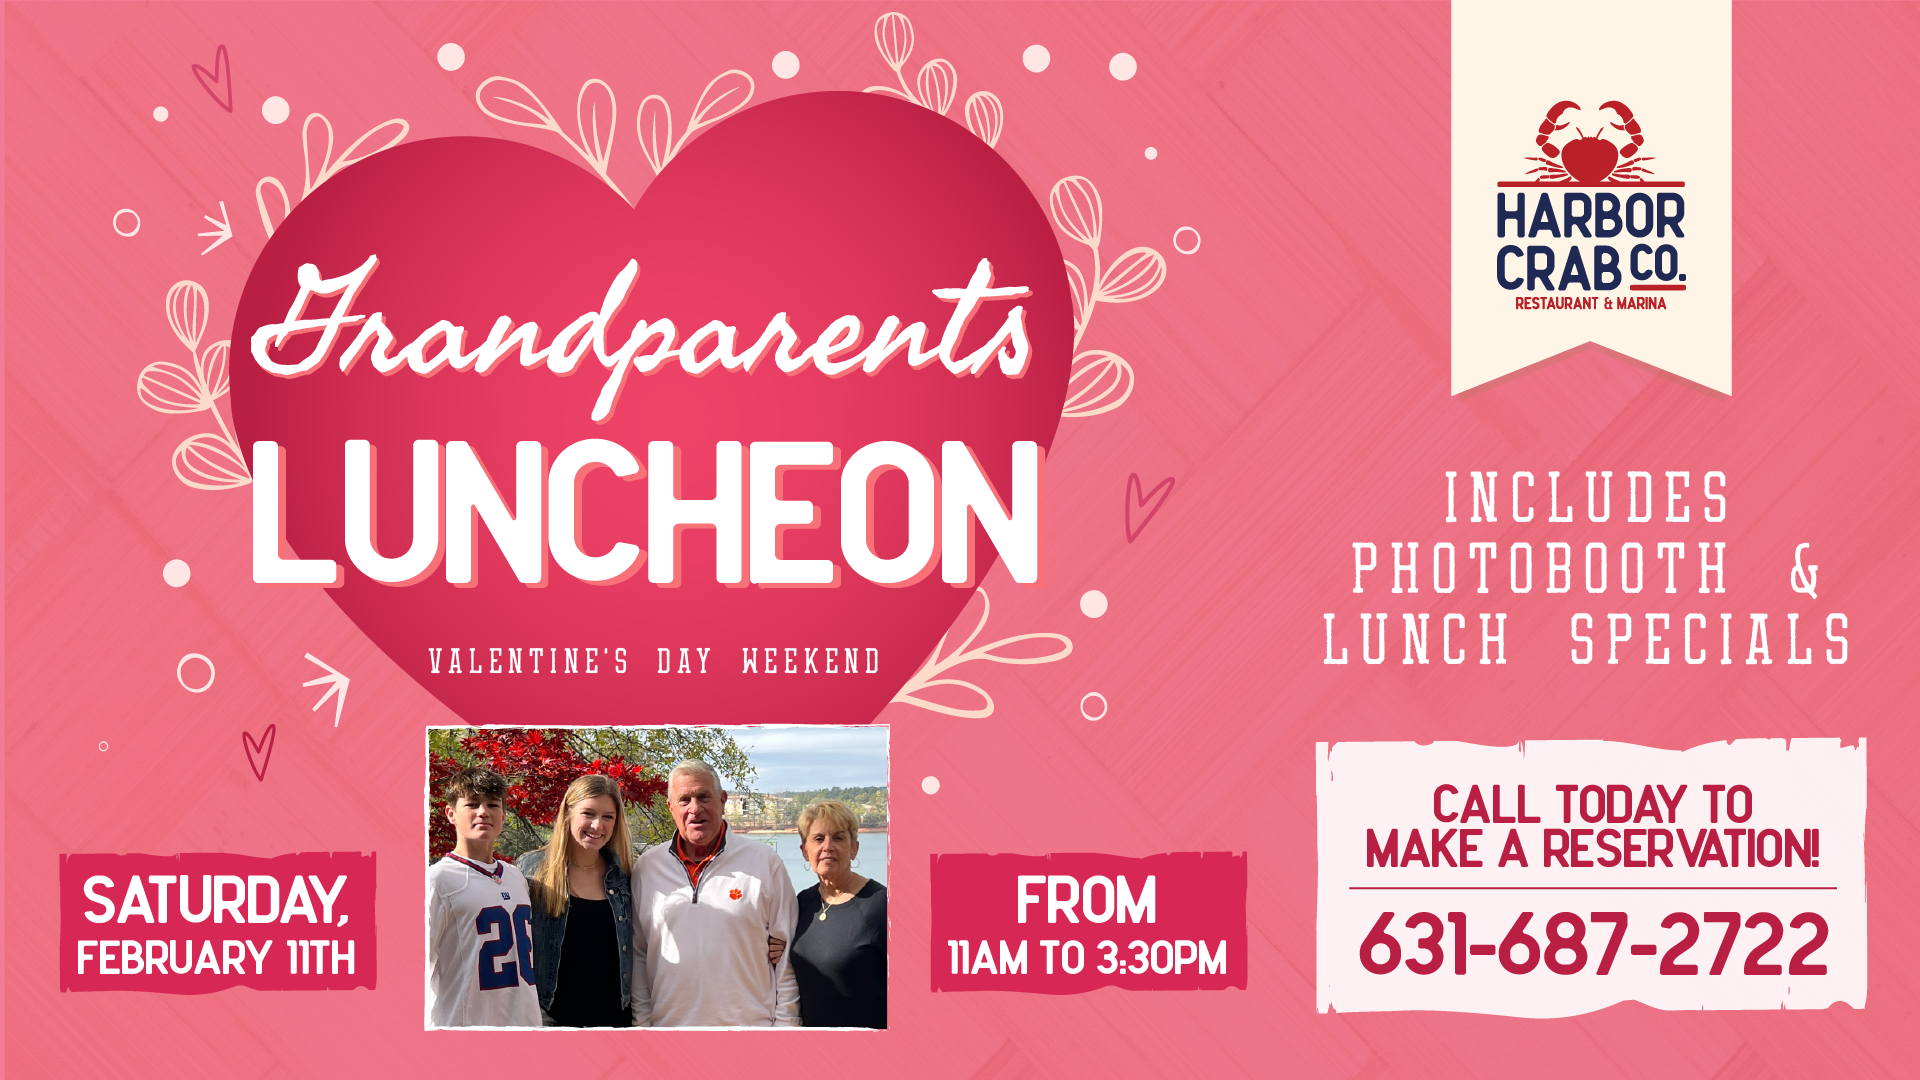 Flyer for Grandparents Luncheon at Harbor Crab on Saturday, February 11th at 11am